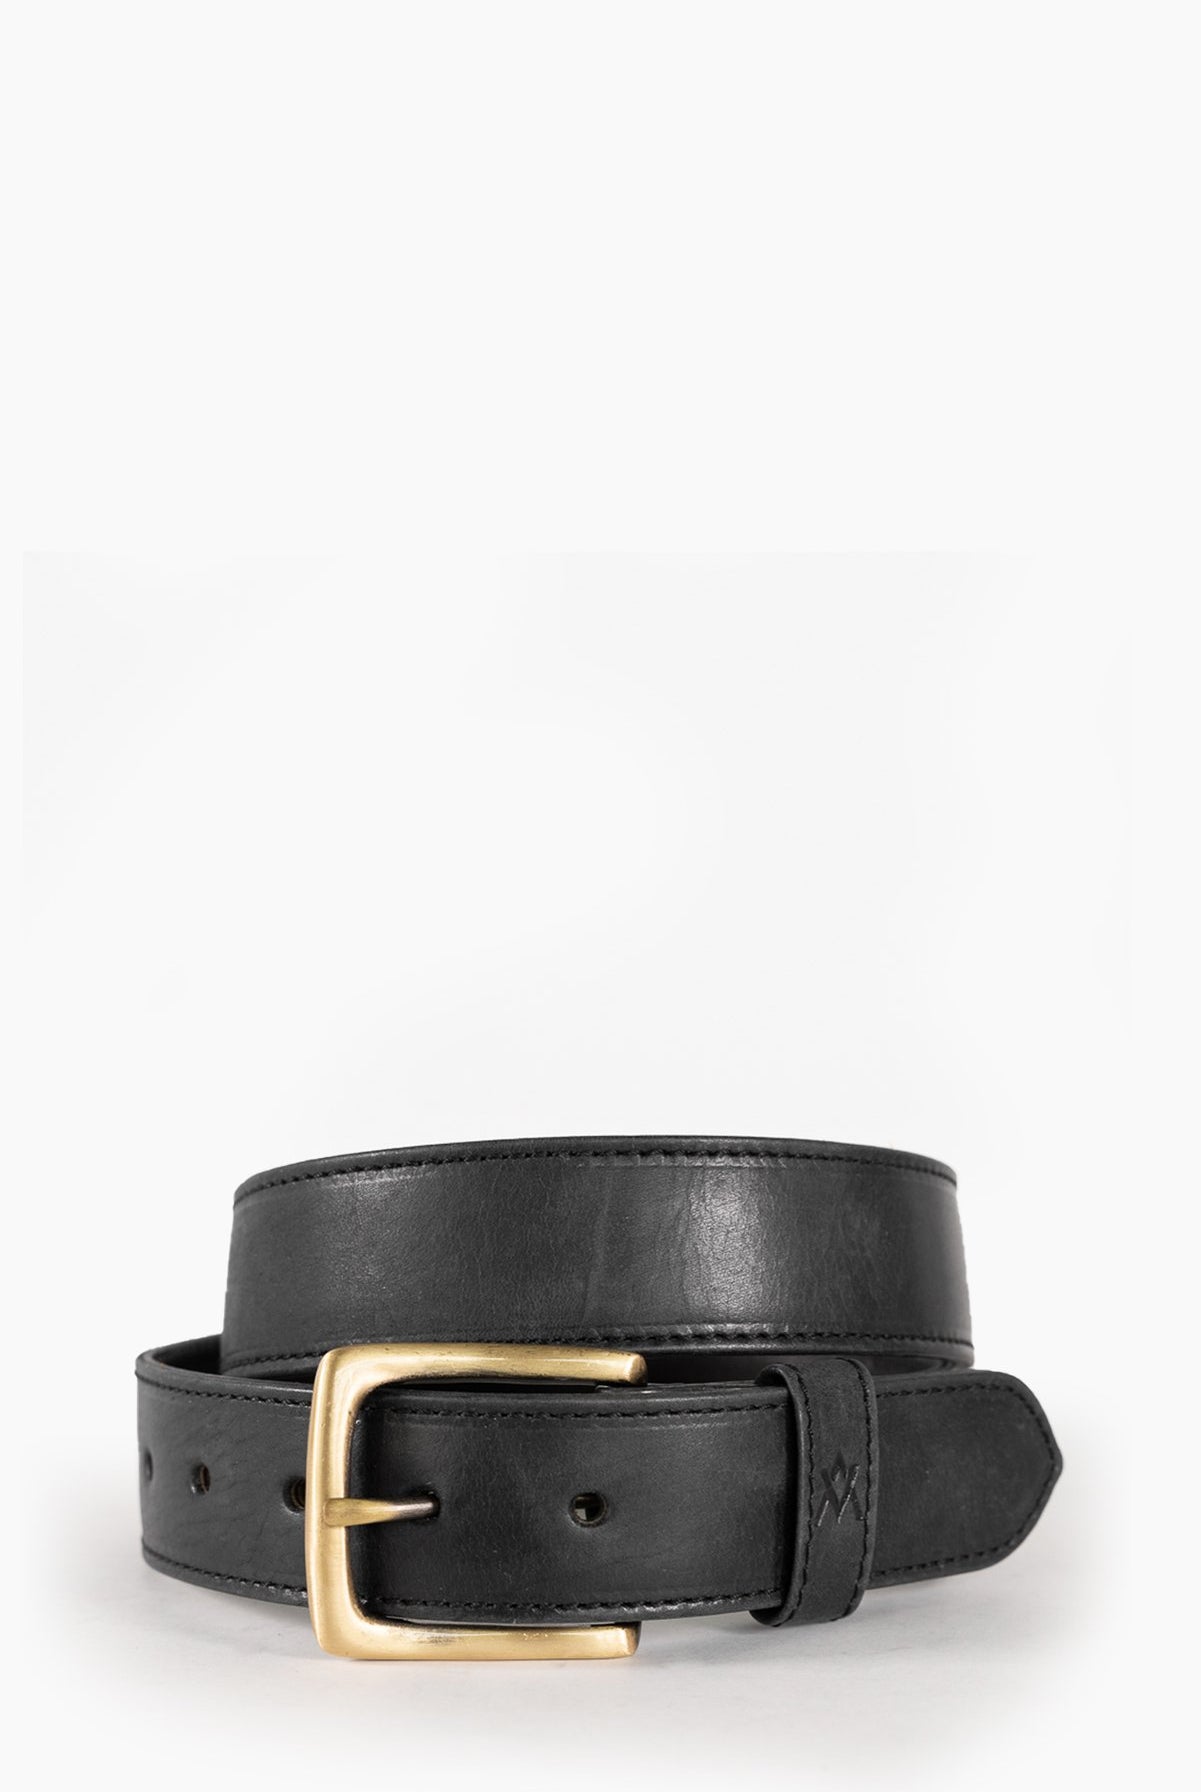 Elevate men's black leather belt raleigh ethical boutique